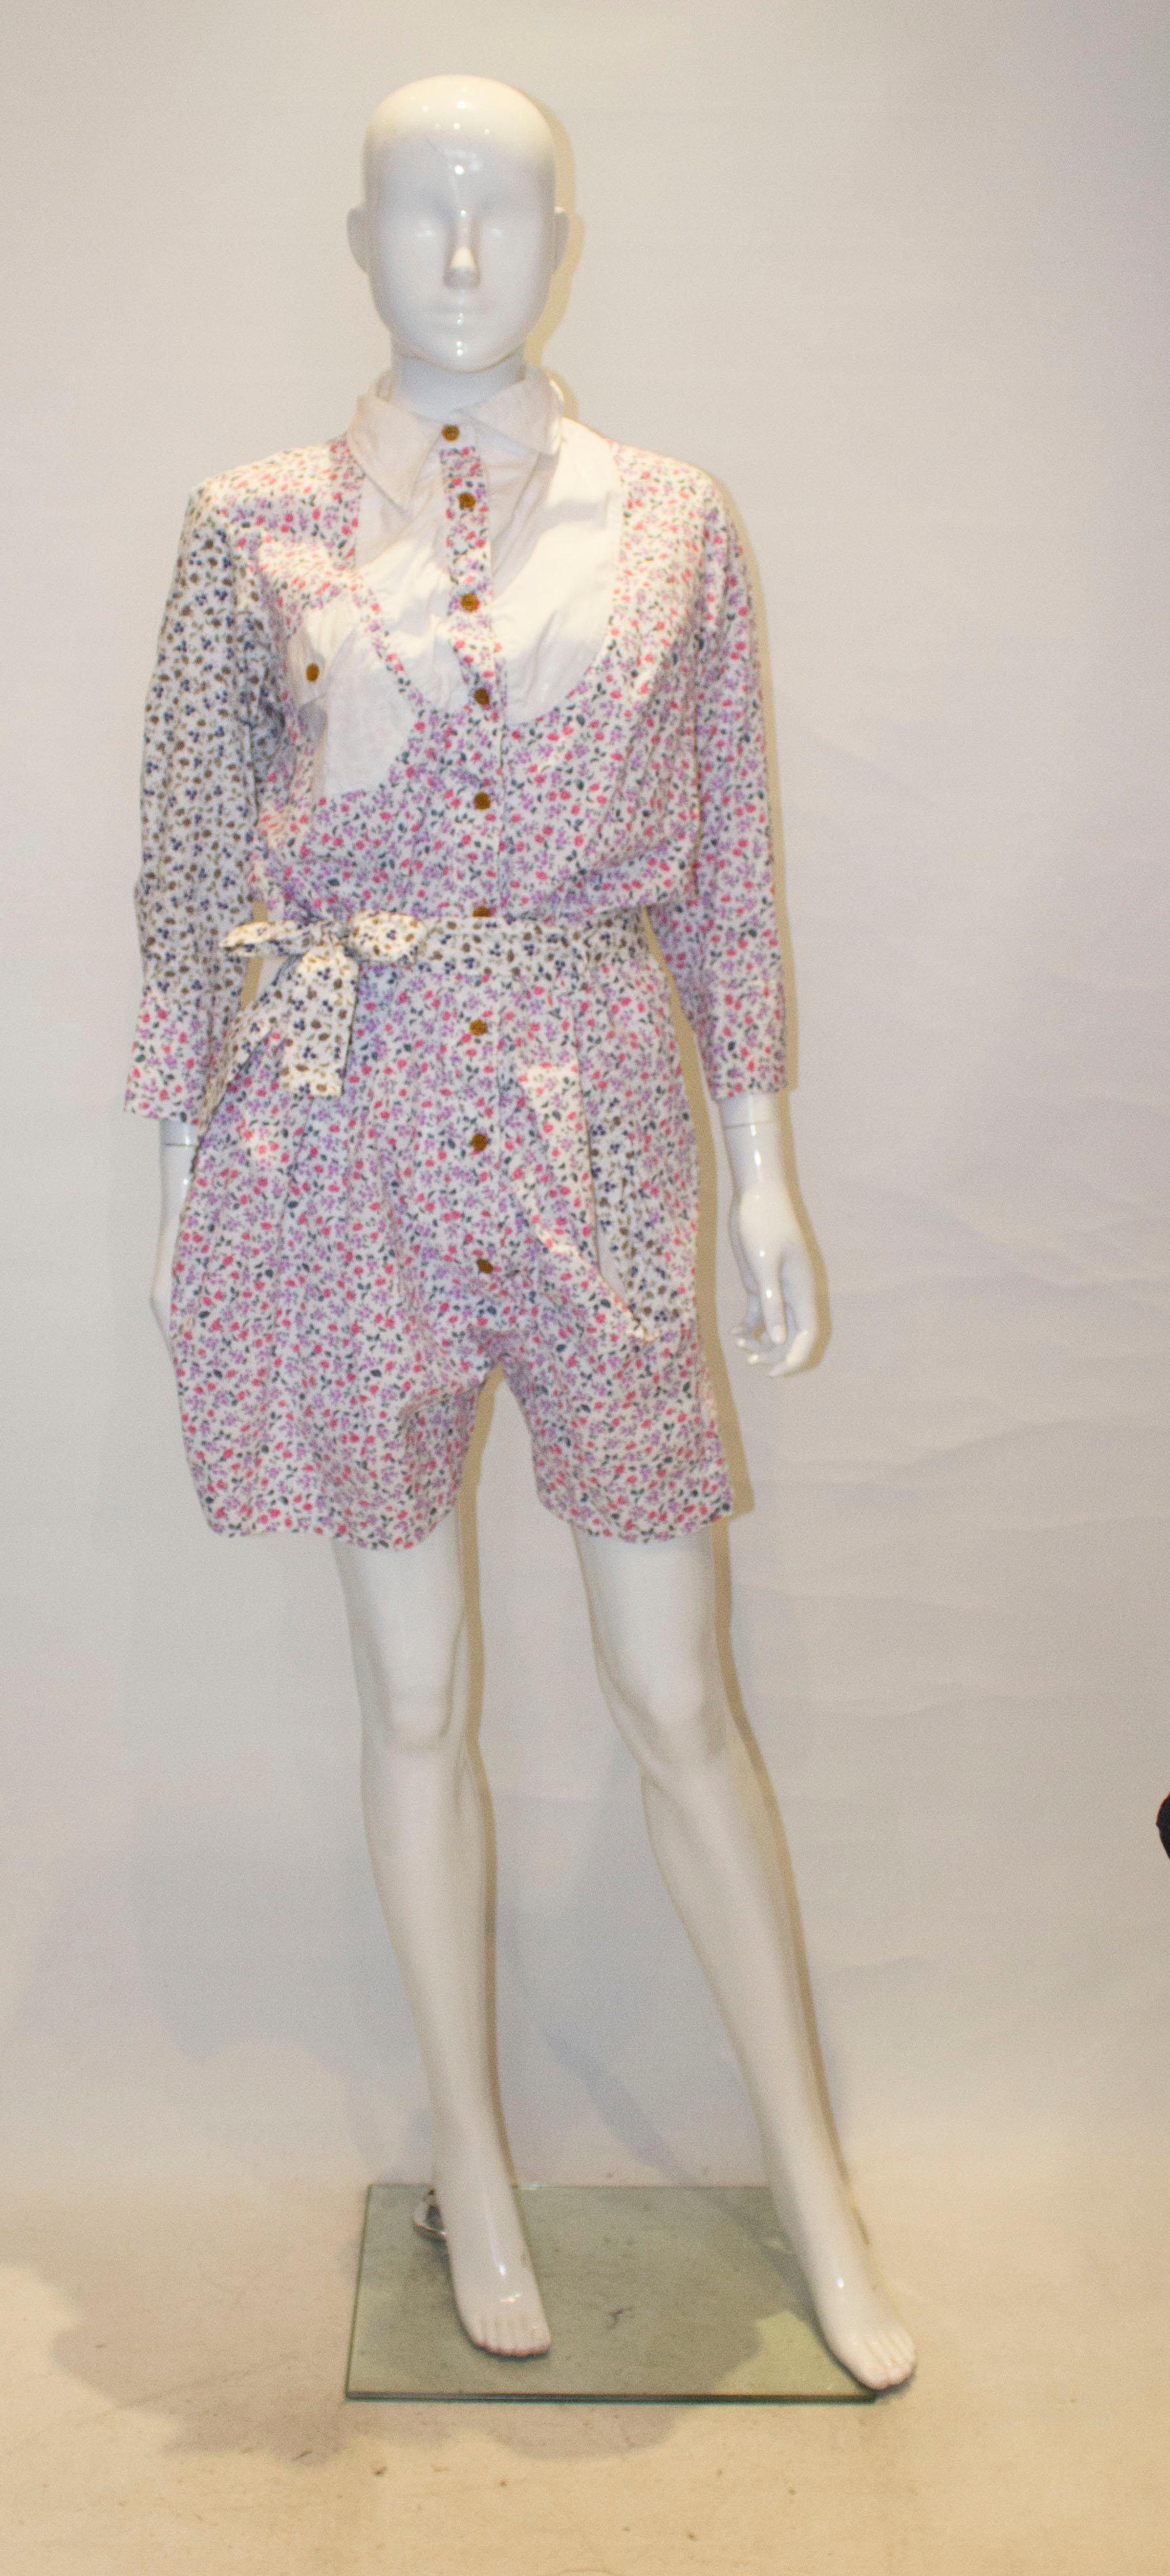 A fun playsuit in floral cotton by Vivienne Westwood, Red Label. The suit has a white collar, yoke and pocket, with a nine button front opening. It has a self fabric belt and pockets front and back.